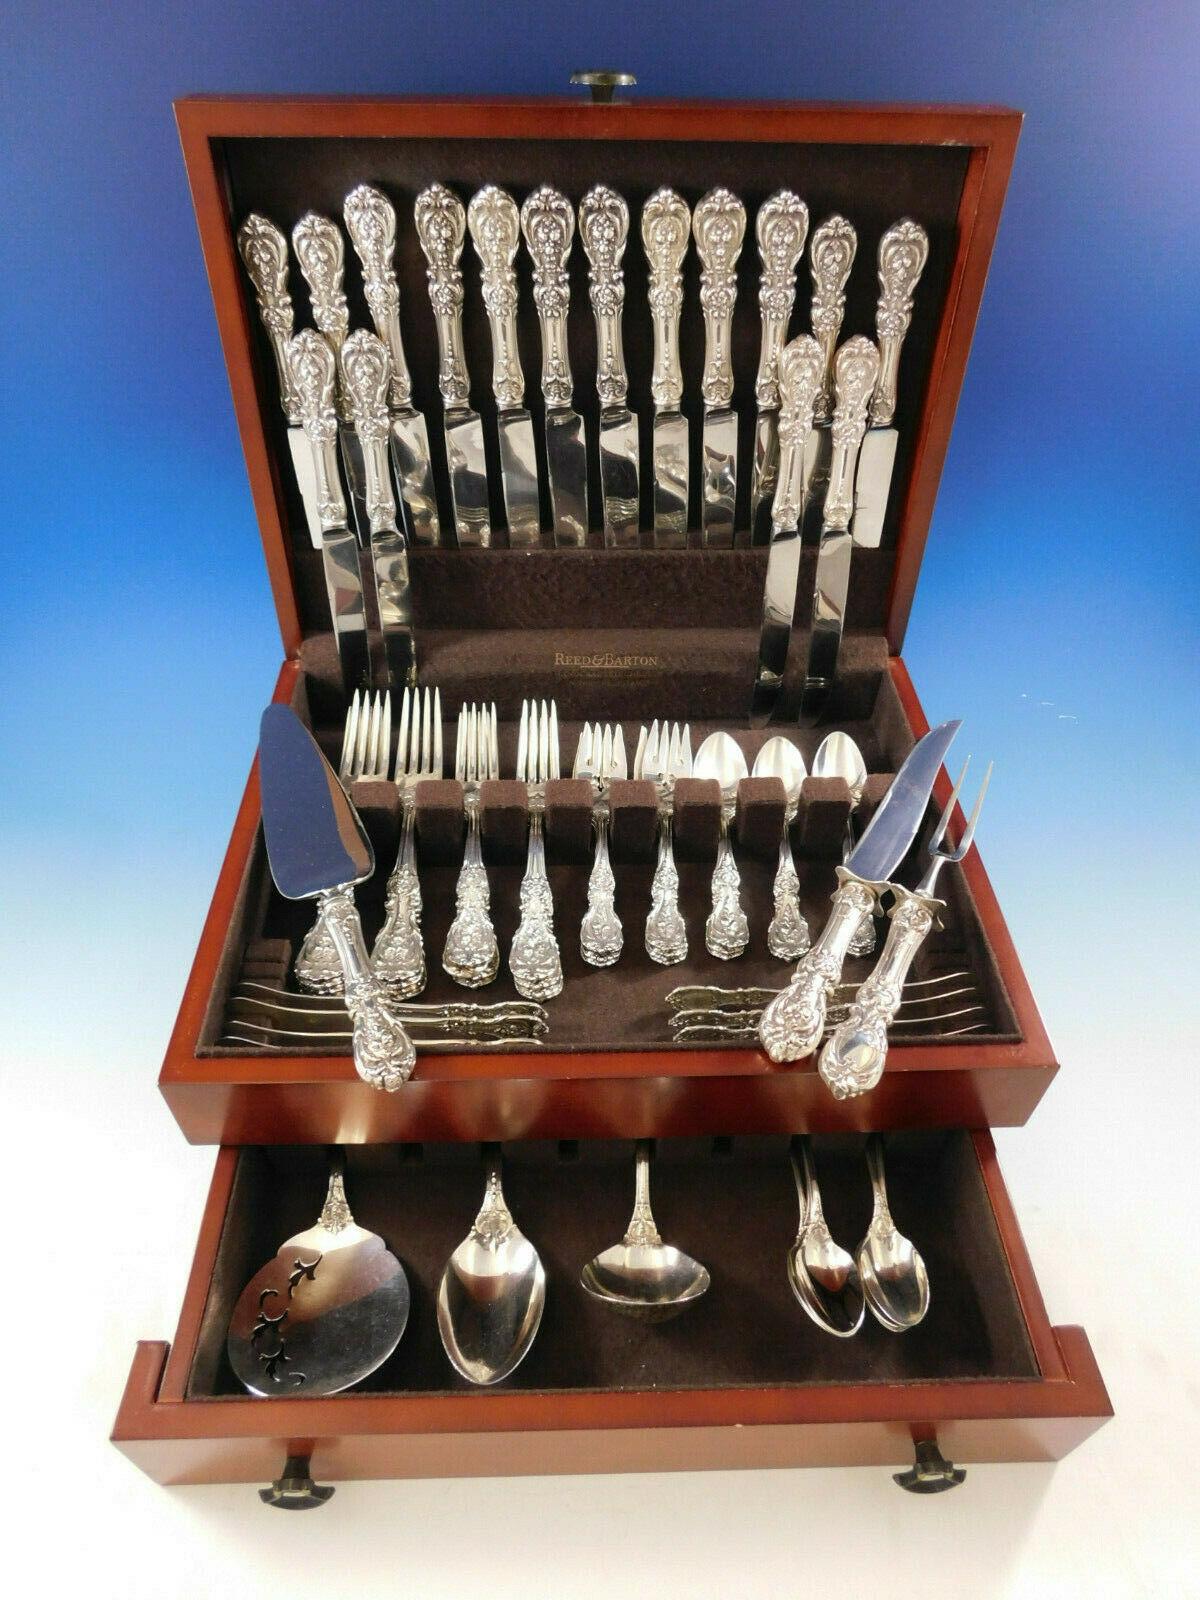 Francis I by Reed & Barton old mark vintage flatware dinner and regular size set with crisp pattern detail, 70 pieces. This set includes:

8 dinner size knives, 9 3/4